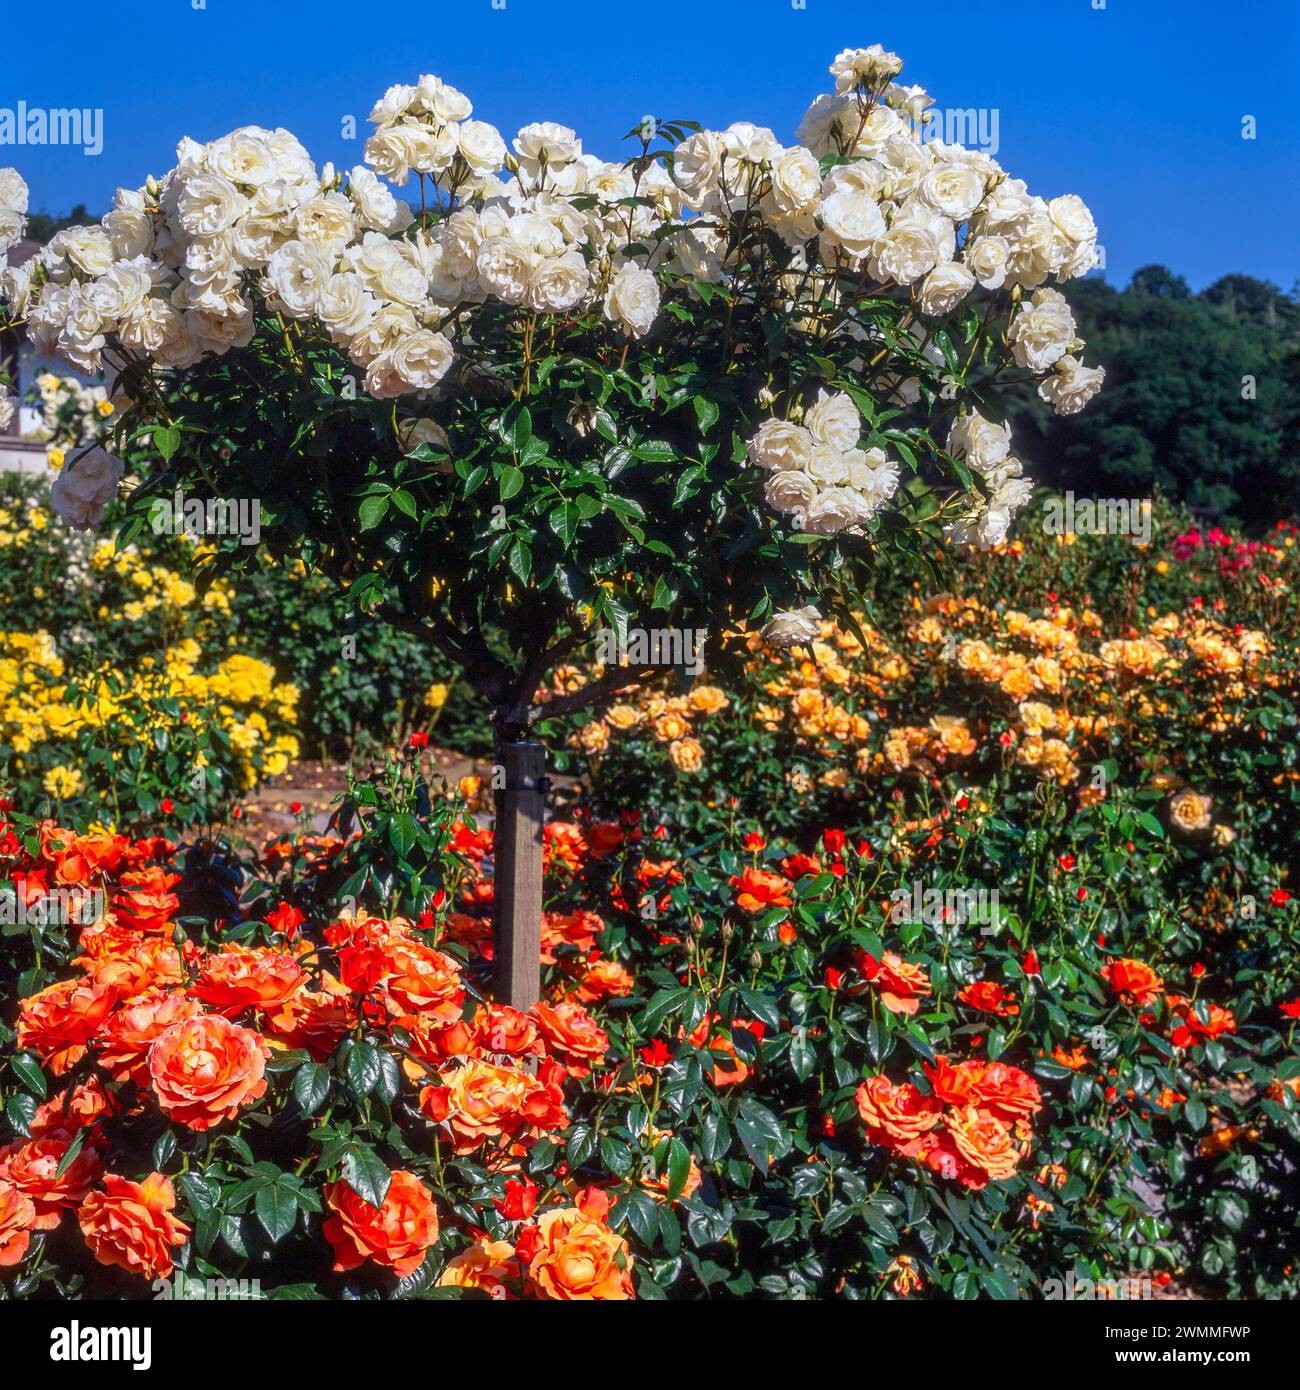 Spectacular colourful rose garden at Rosemoor in 1996 with Rosa 'Fellowship', 'Iceberg' and 'Michael of Kent' roses in full bloom. Stock Photo